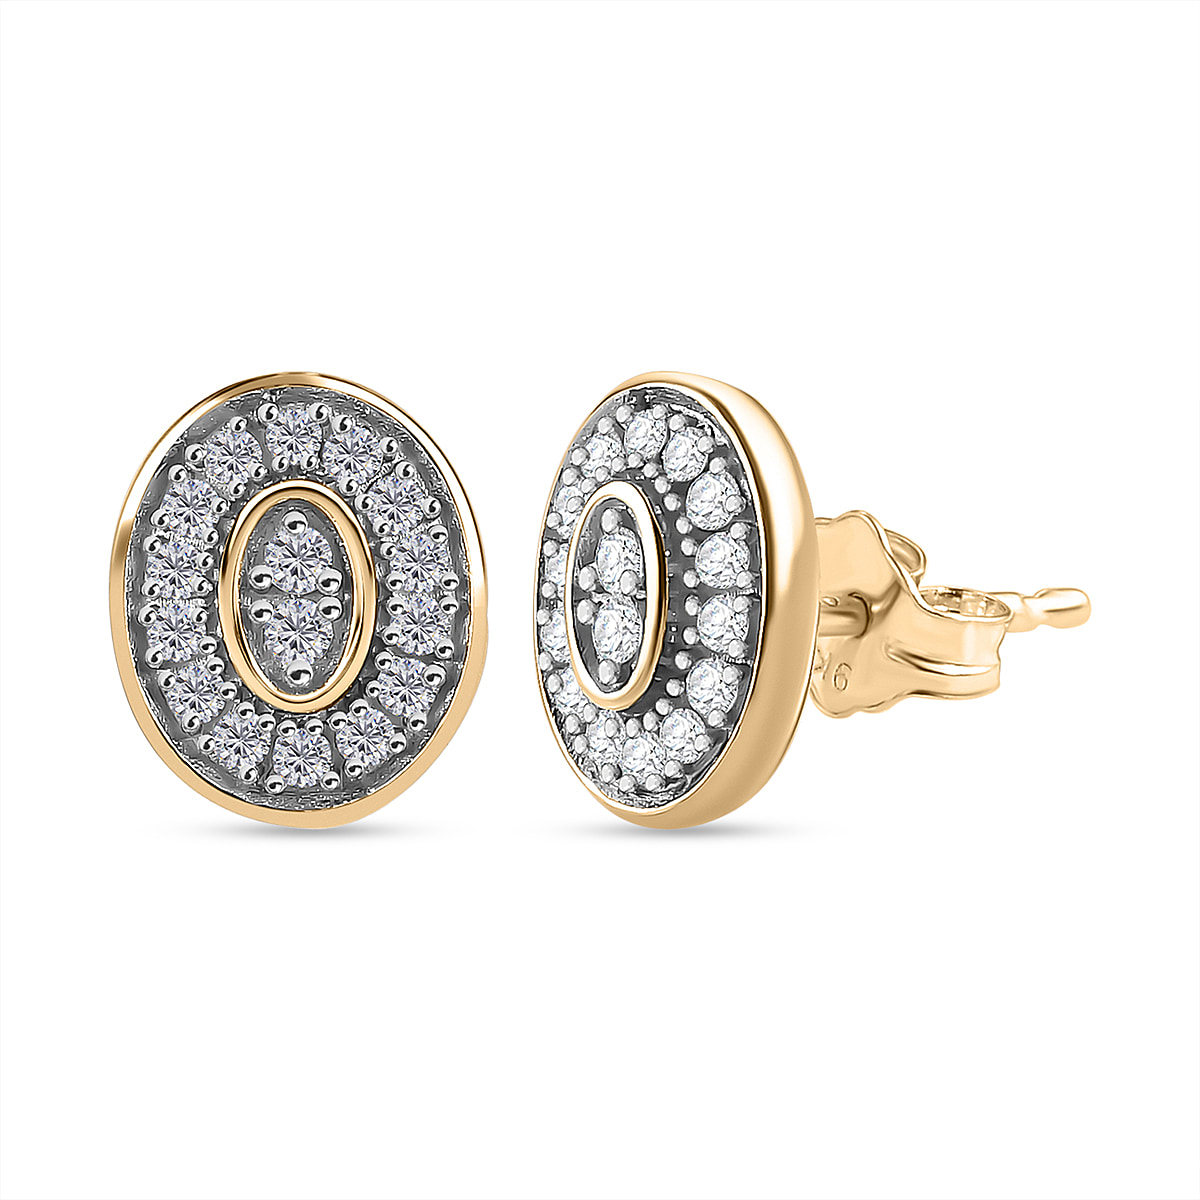 TLV Your Choice - 9K Yellow Gold Natural White Diamond Earrings 0.20 Ct - Oval